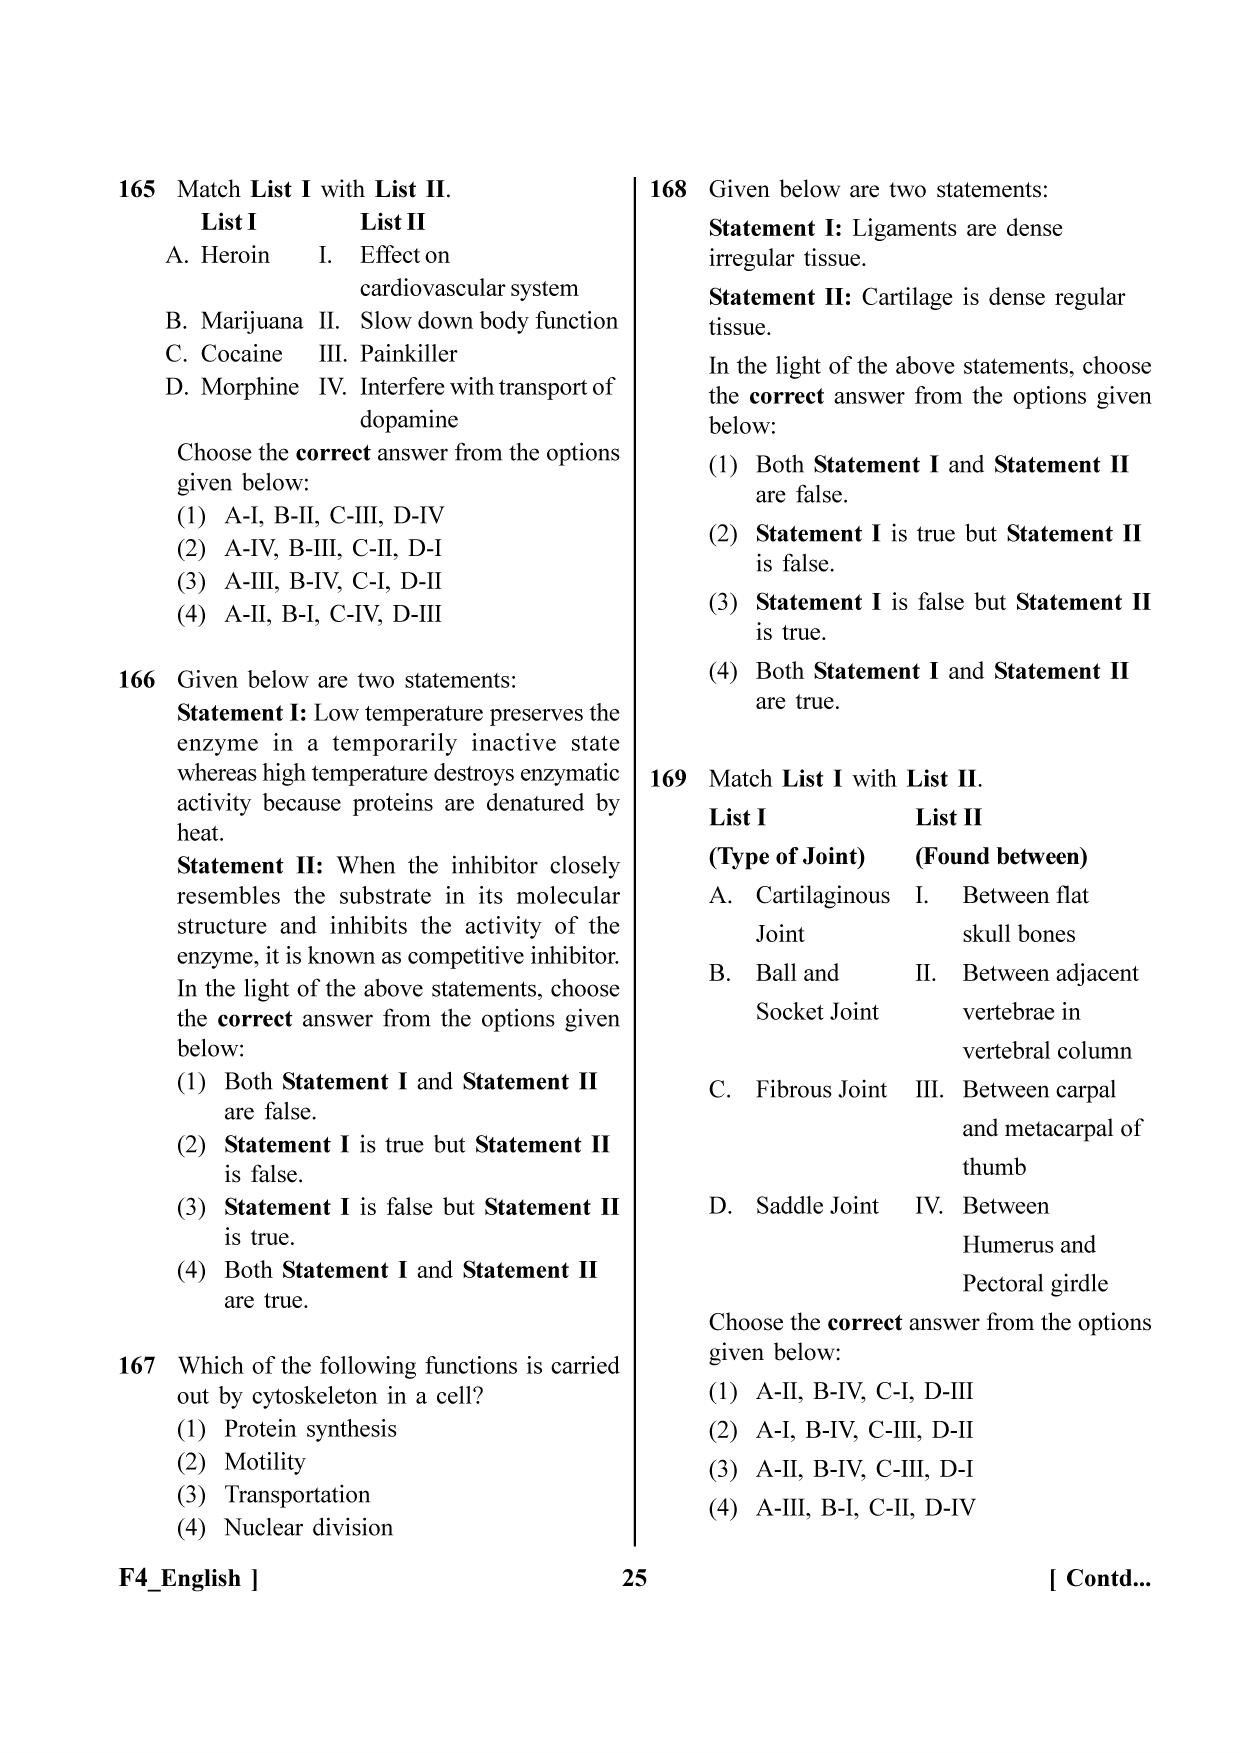 NEET 2023 F4 Question Paper - Page 25